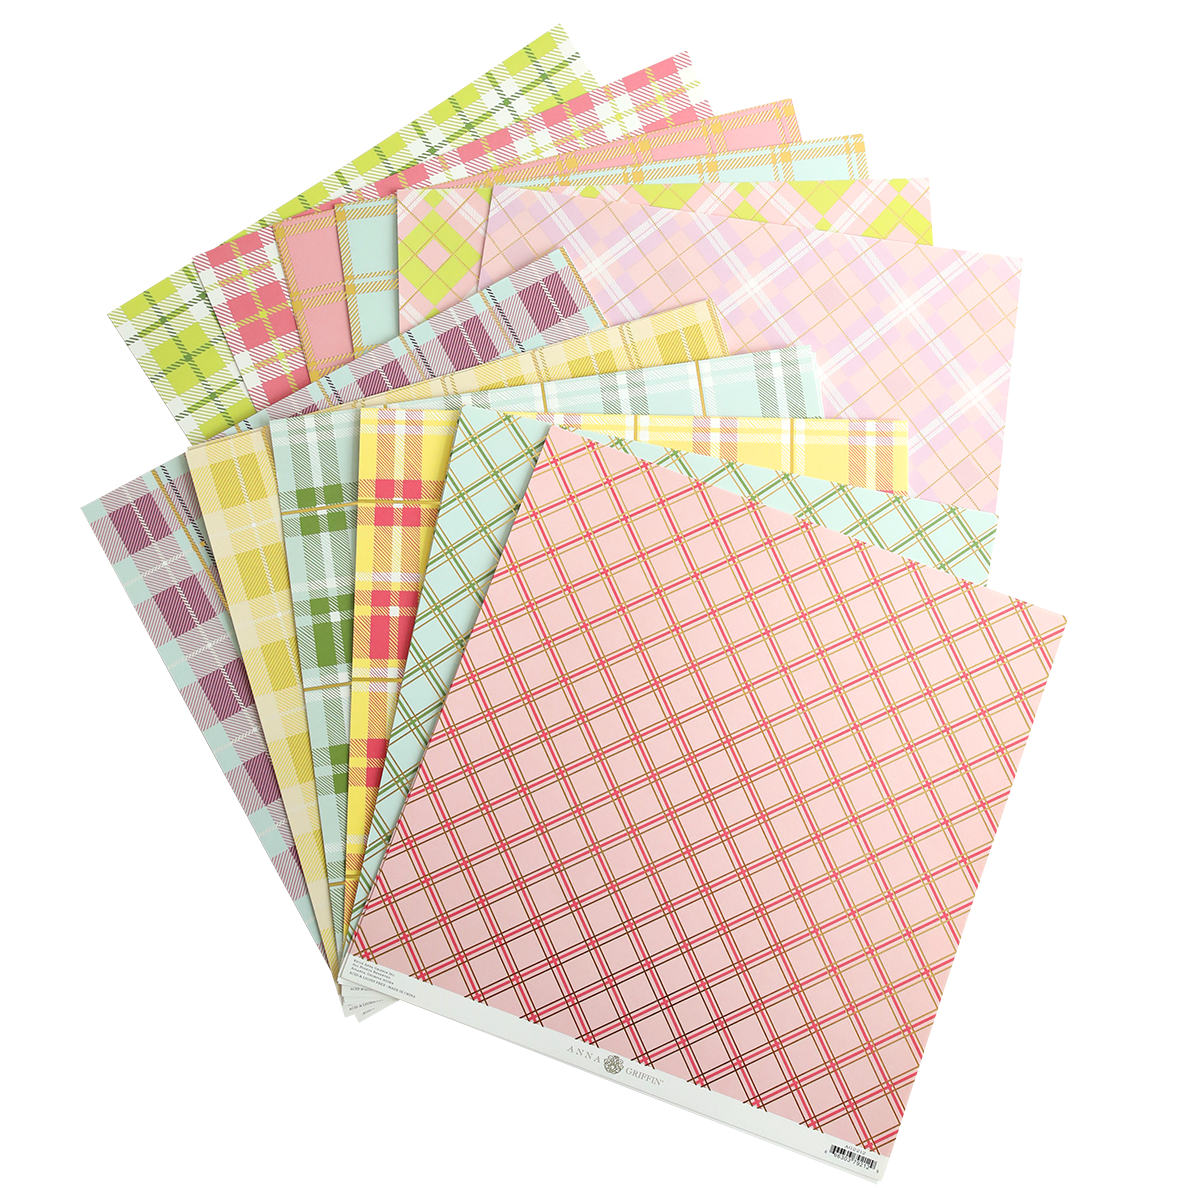 a pile of colorful plaid paper on top of each other.